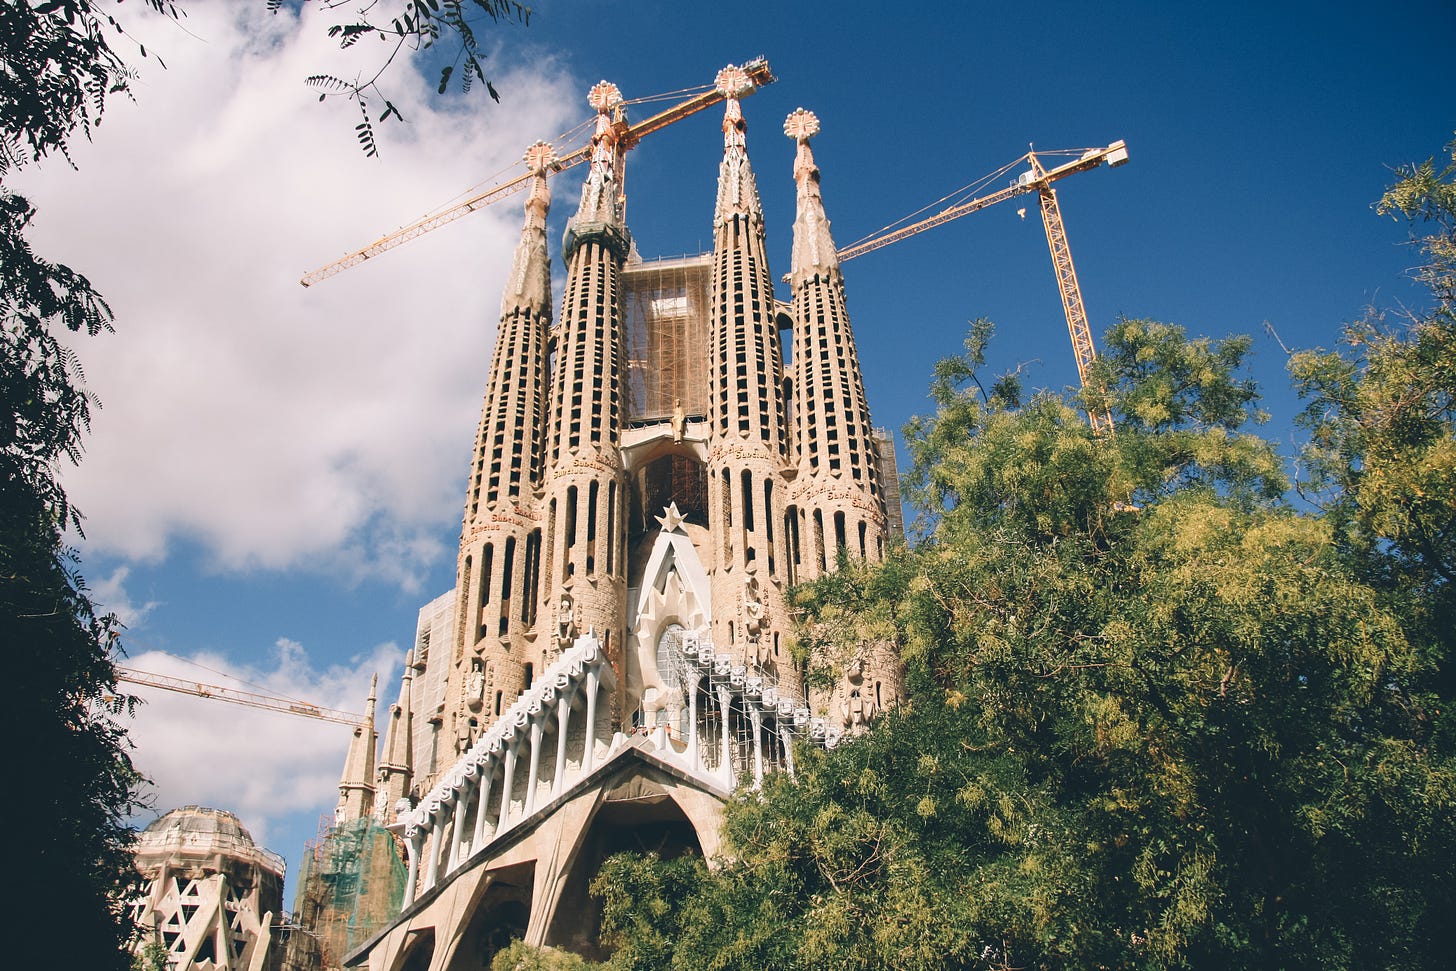 Cranes working above Sagrada Familia, a famous unfinished cathedral in Barcelona, Spain.